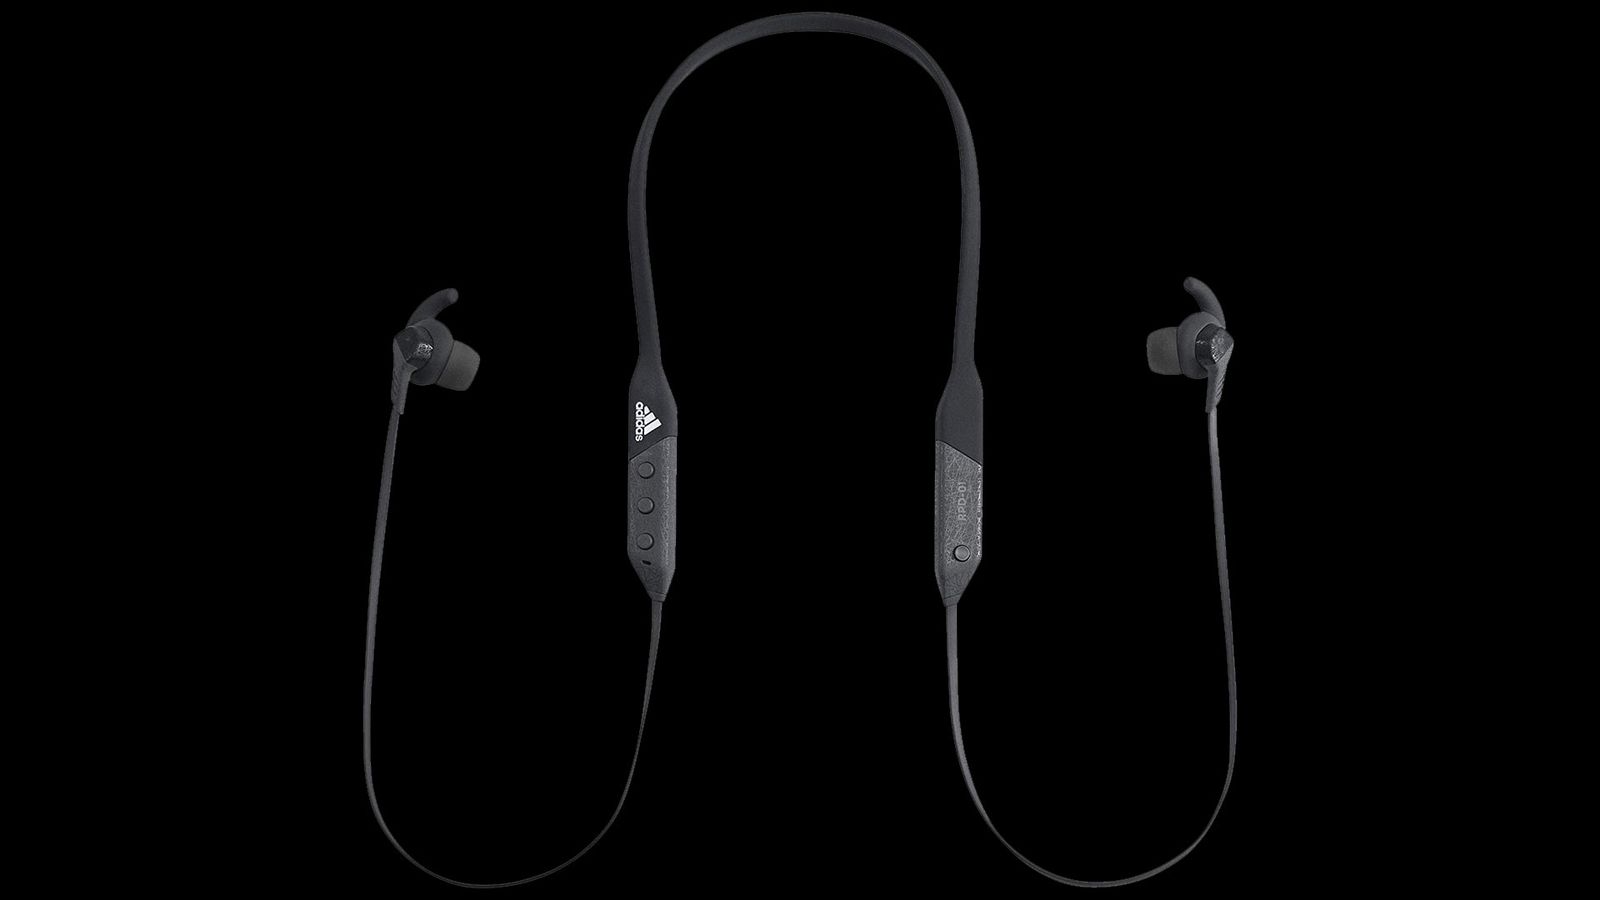 adidas RPD-01 product image of a set of black headphones with wired strap.